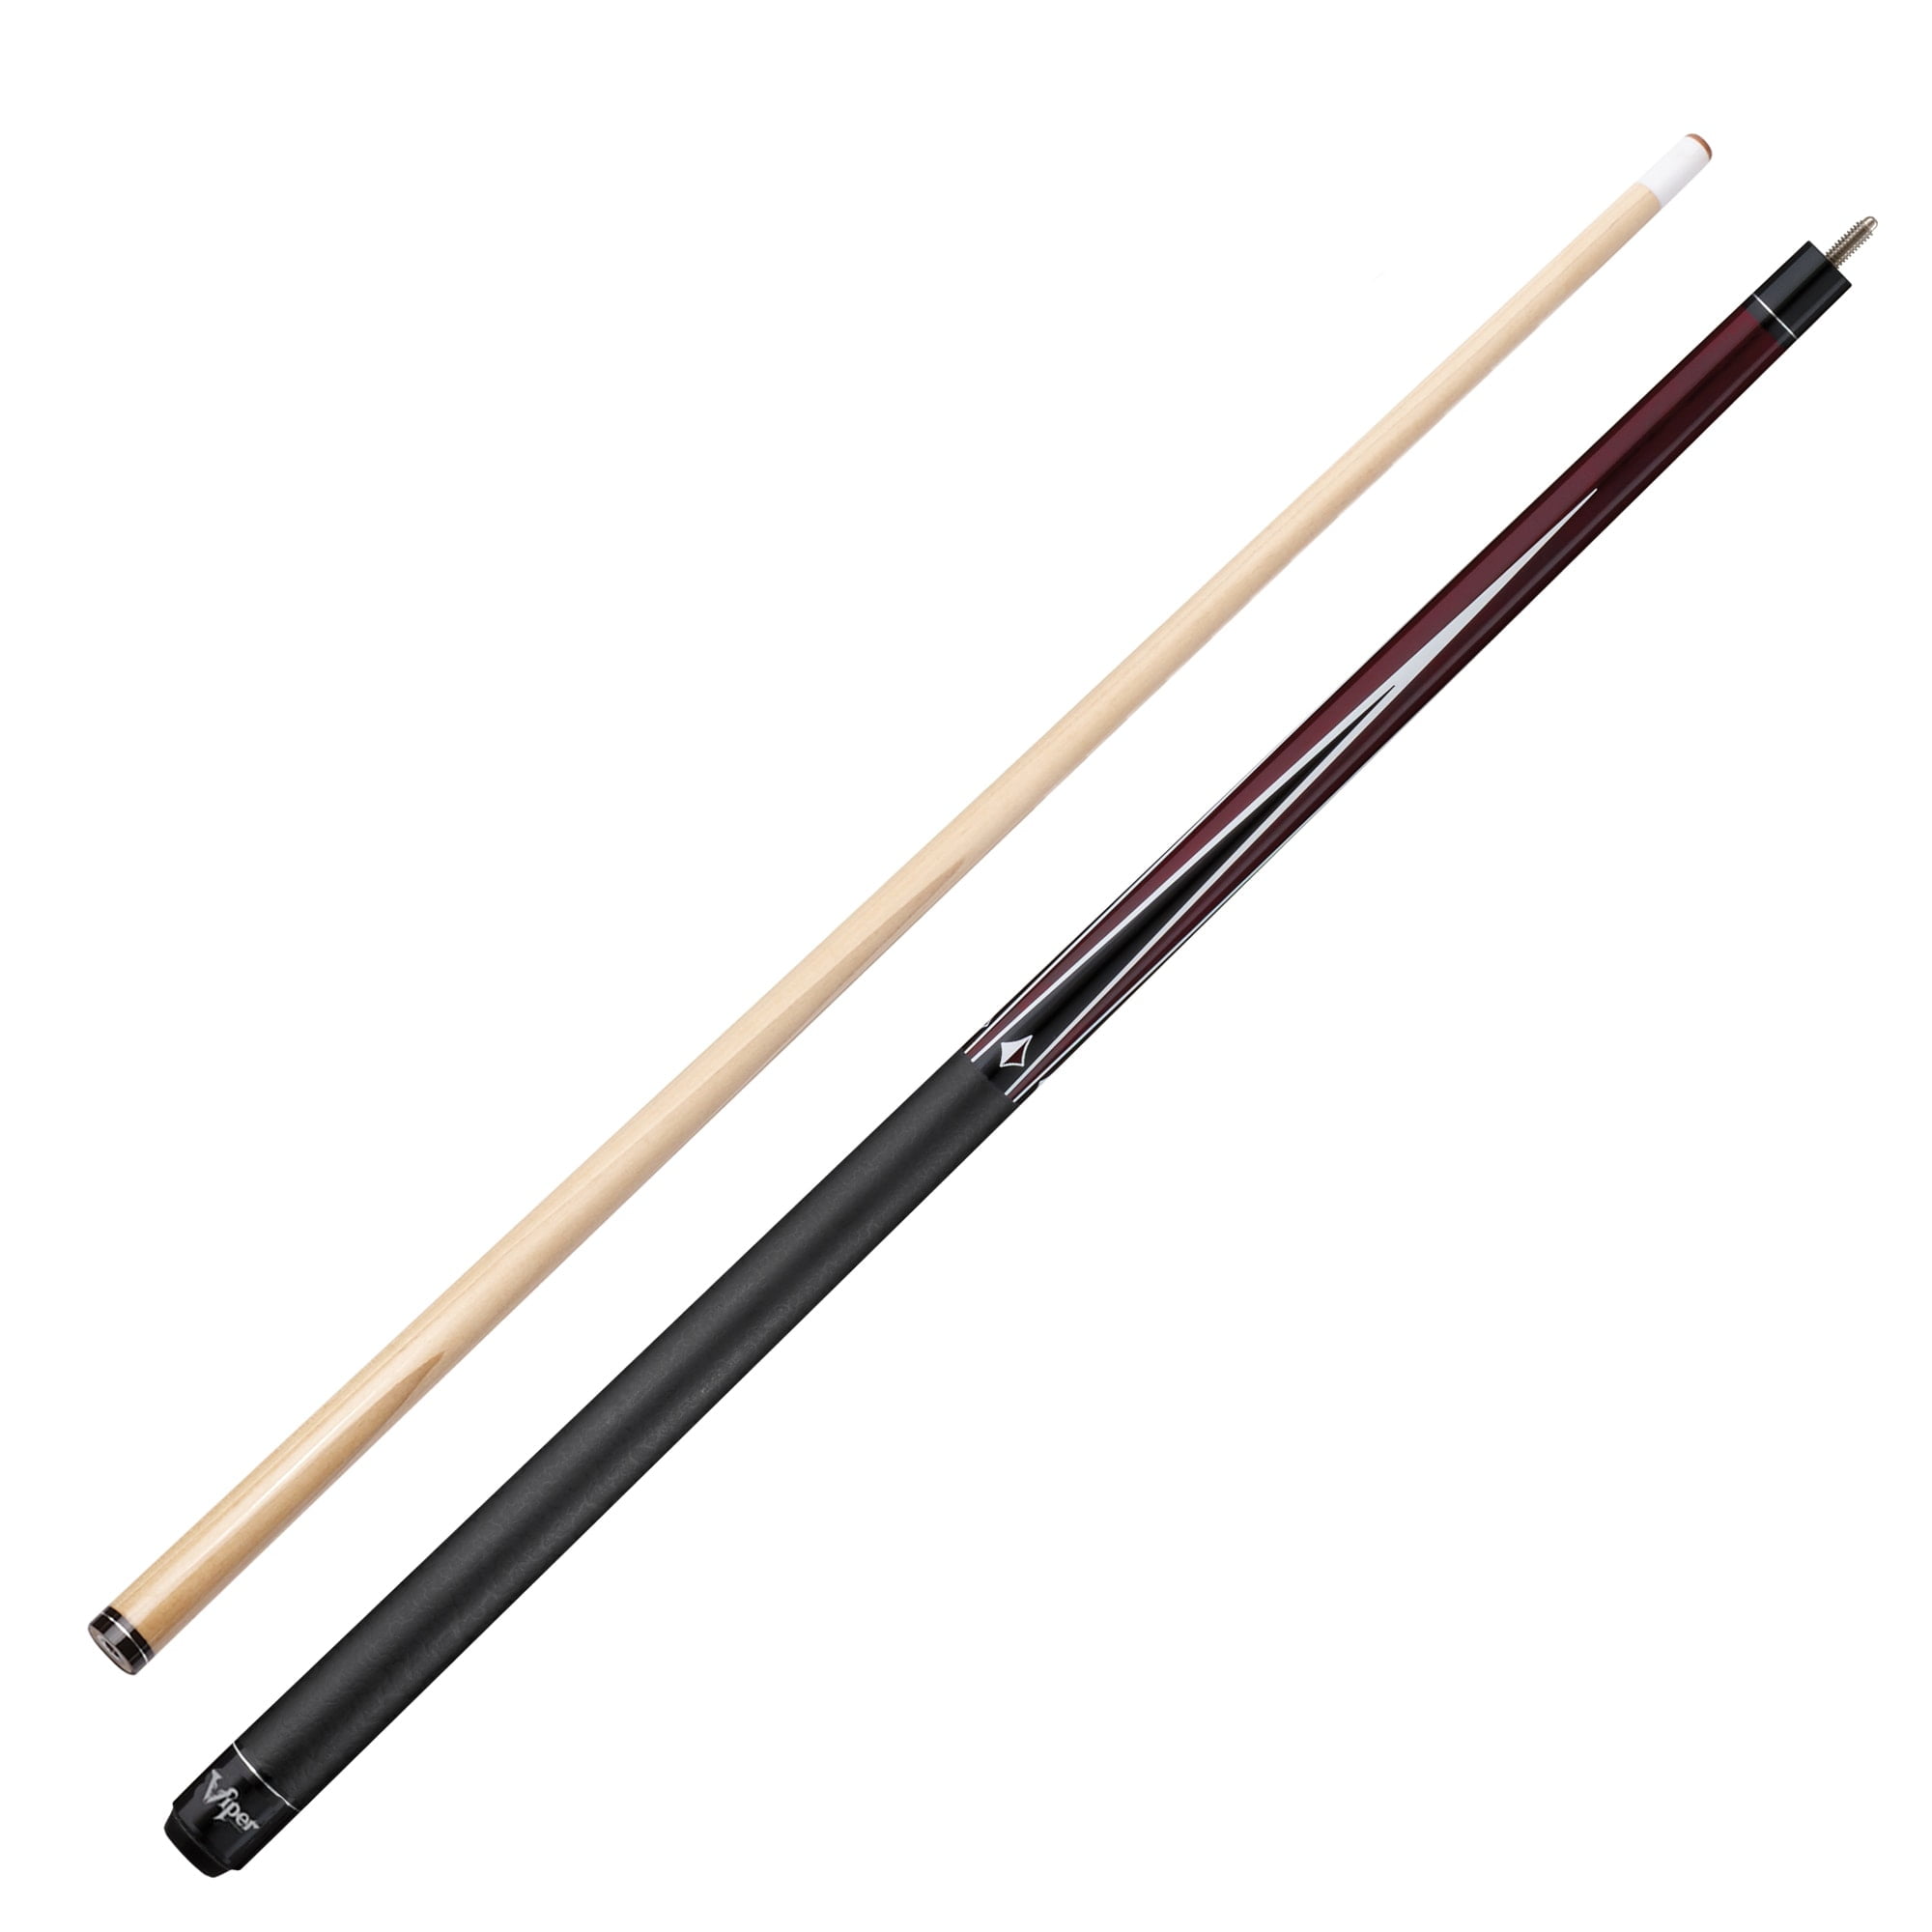 Four Brand New One Piece Pool Cues sticks Bar House Maple 4-Prong inlay 57"inch 